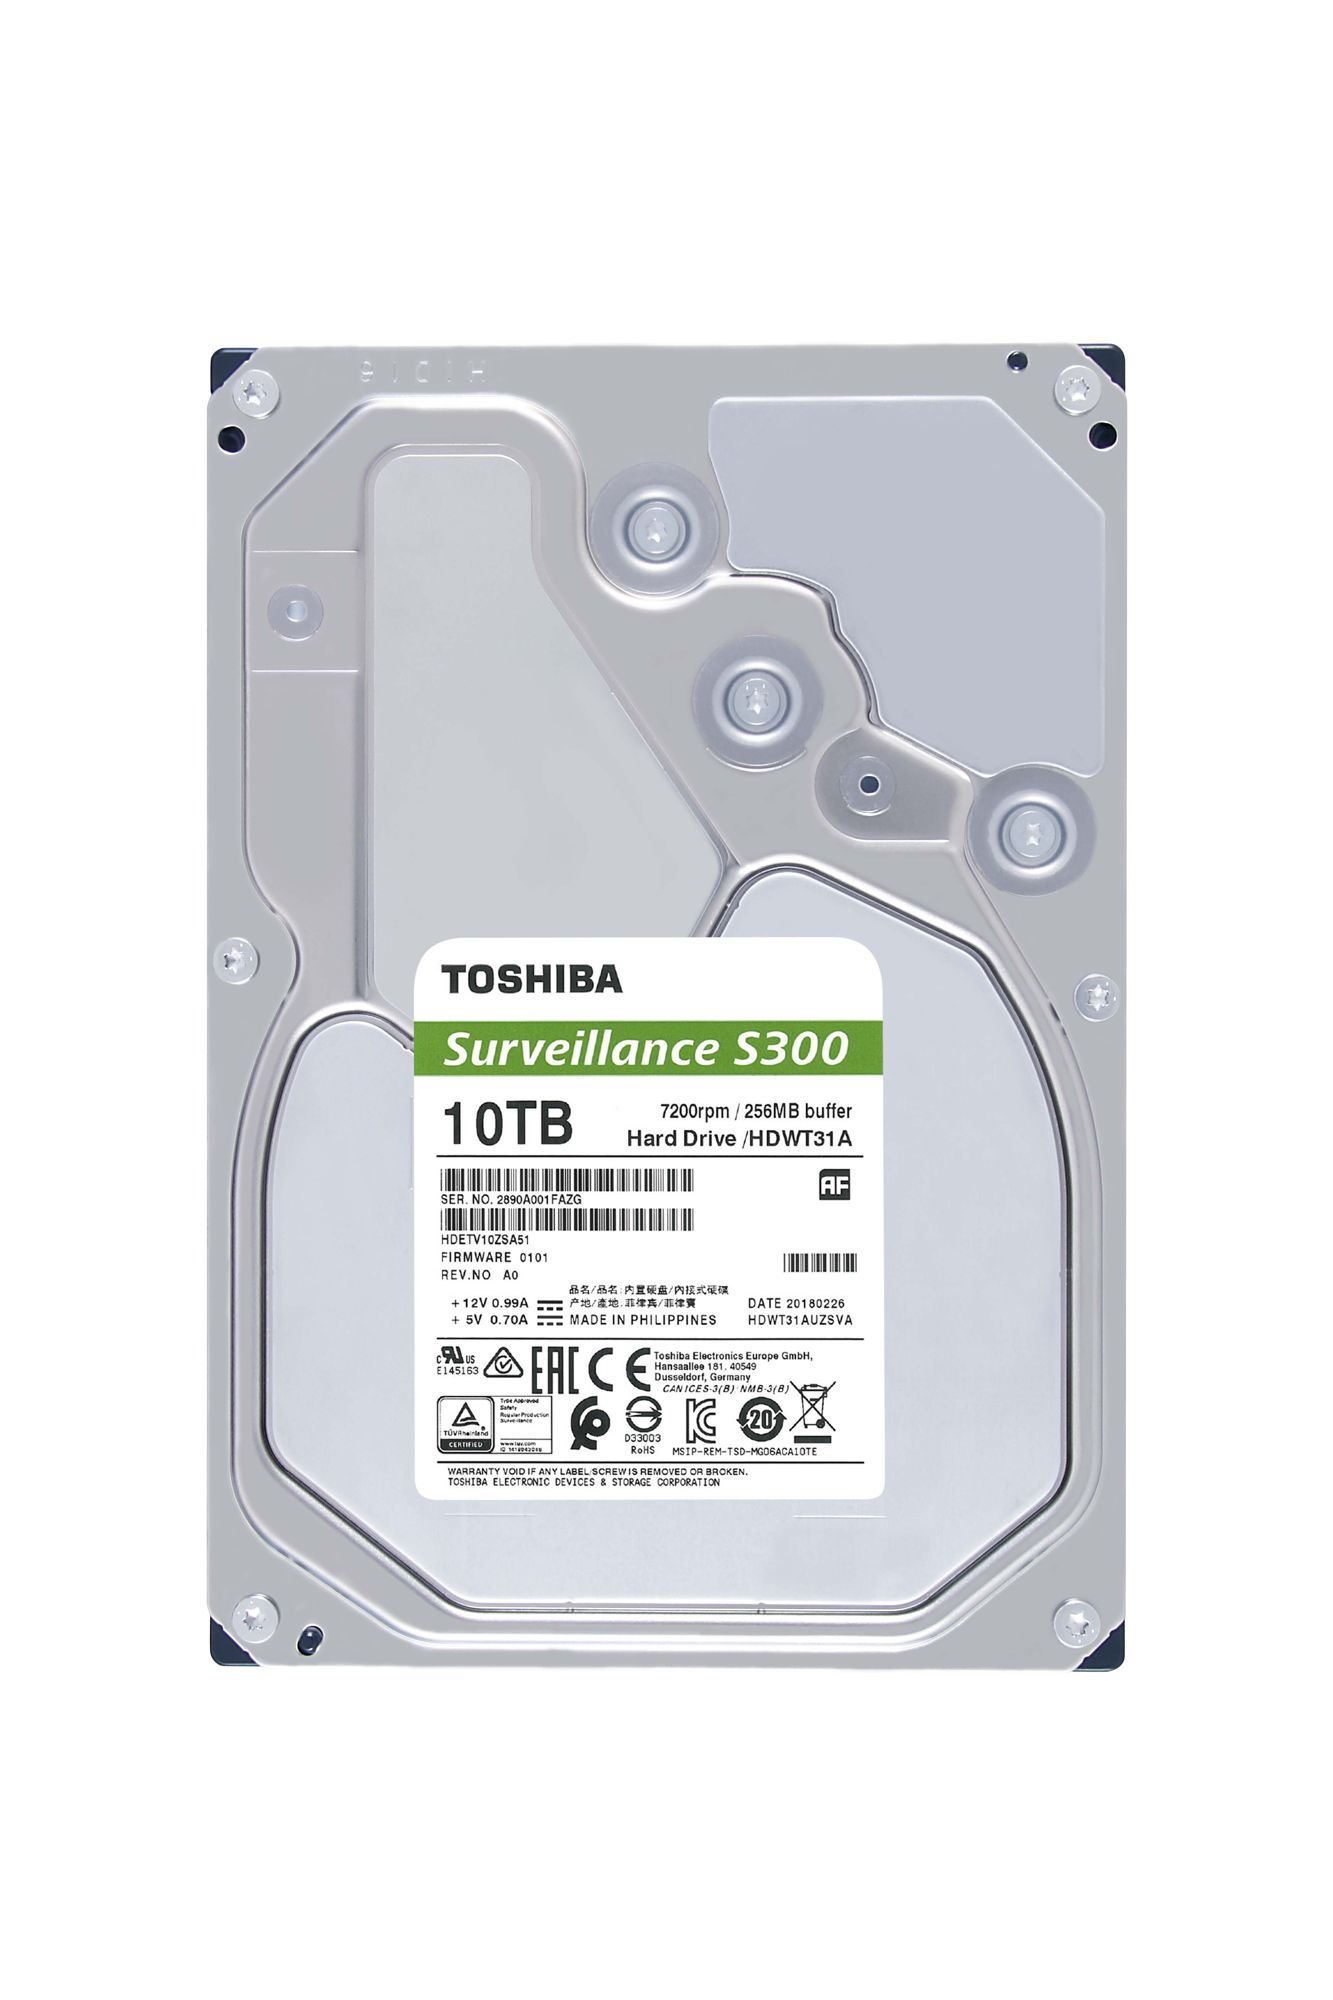 Toshiba releases new, powerful surveillance and video streaming internal hard disk drives